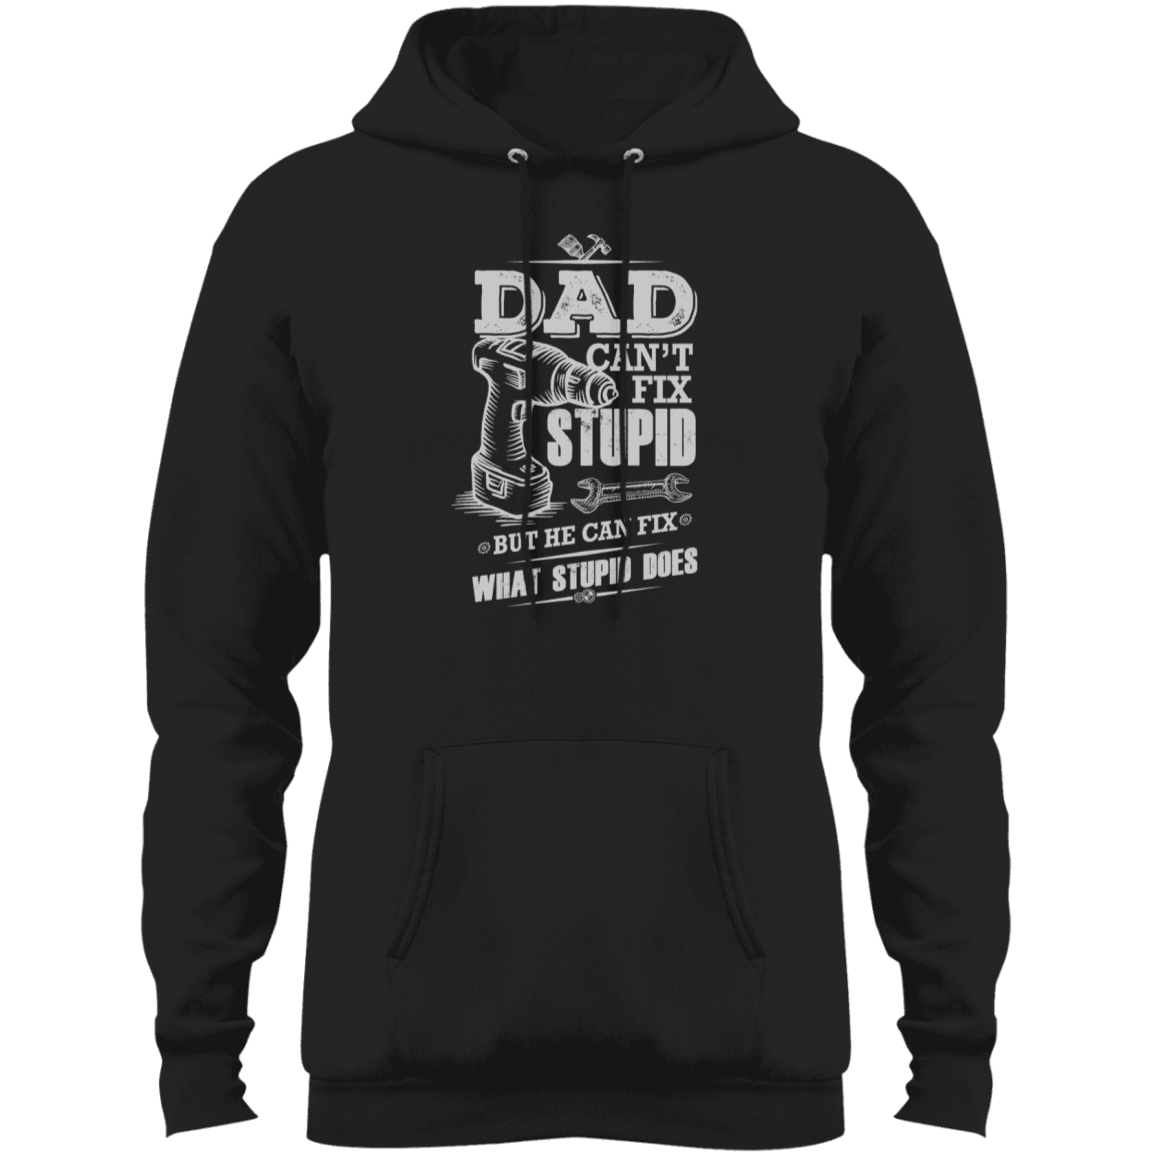 Designs by MyUtopia Shout Out:Dad Can't Fix Stupid Core Fleece Pullover Hoodie,Jet Black / S,Sweatshirts